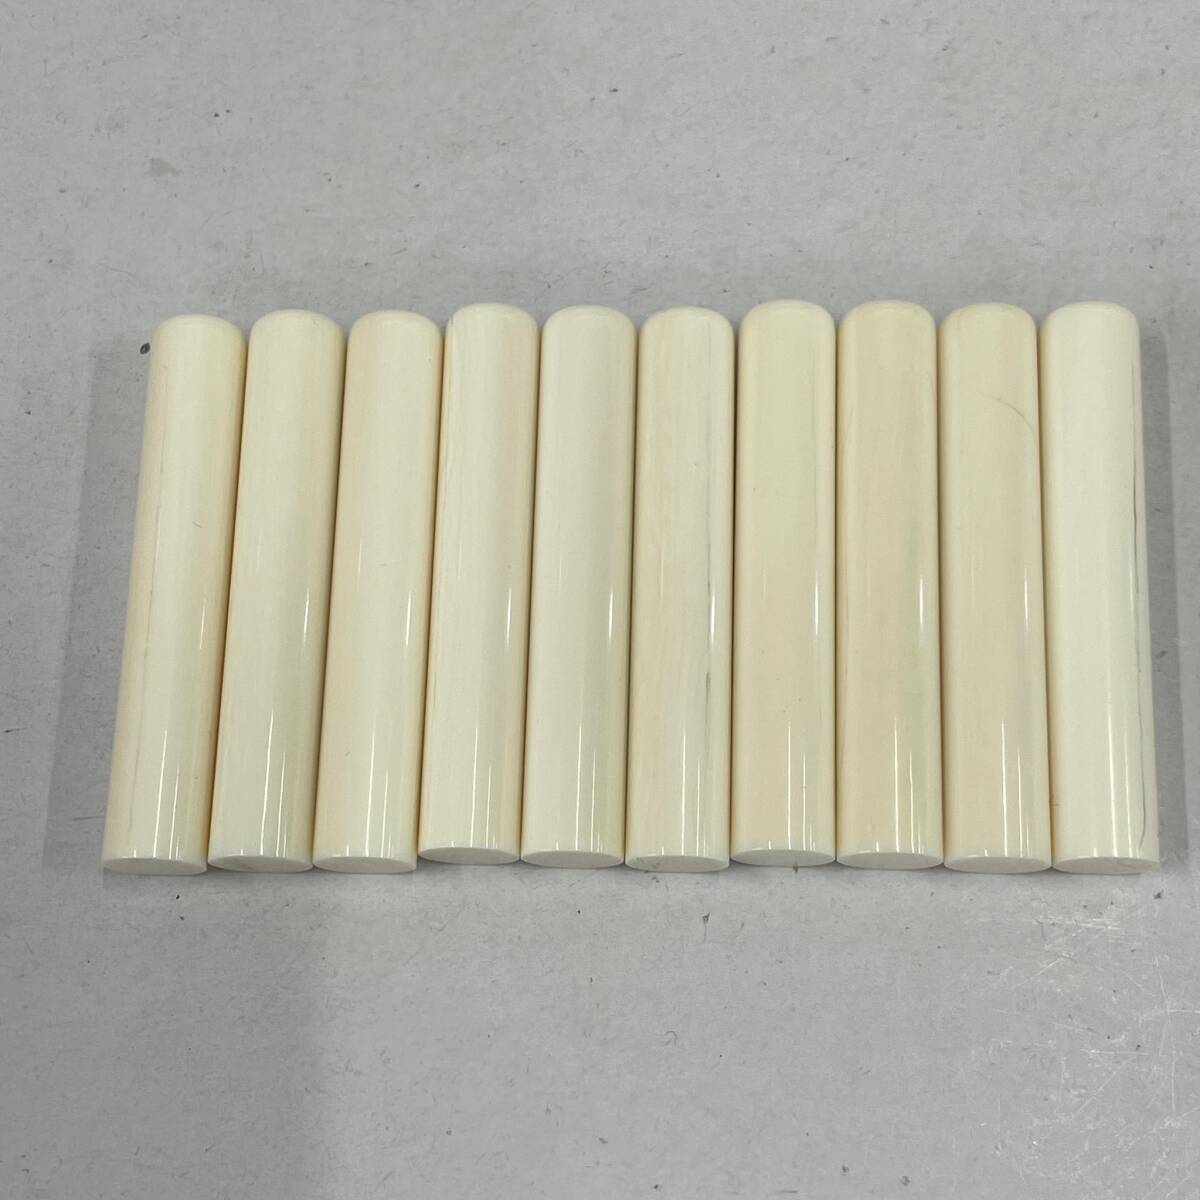  not yet carving stamp material 10.5mm 10ps.@ set sale crack * dirt equipped cow angle material etc. ivory manner [ZB-02]